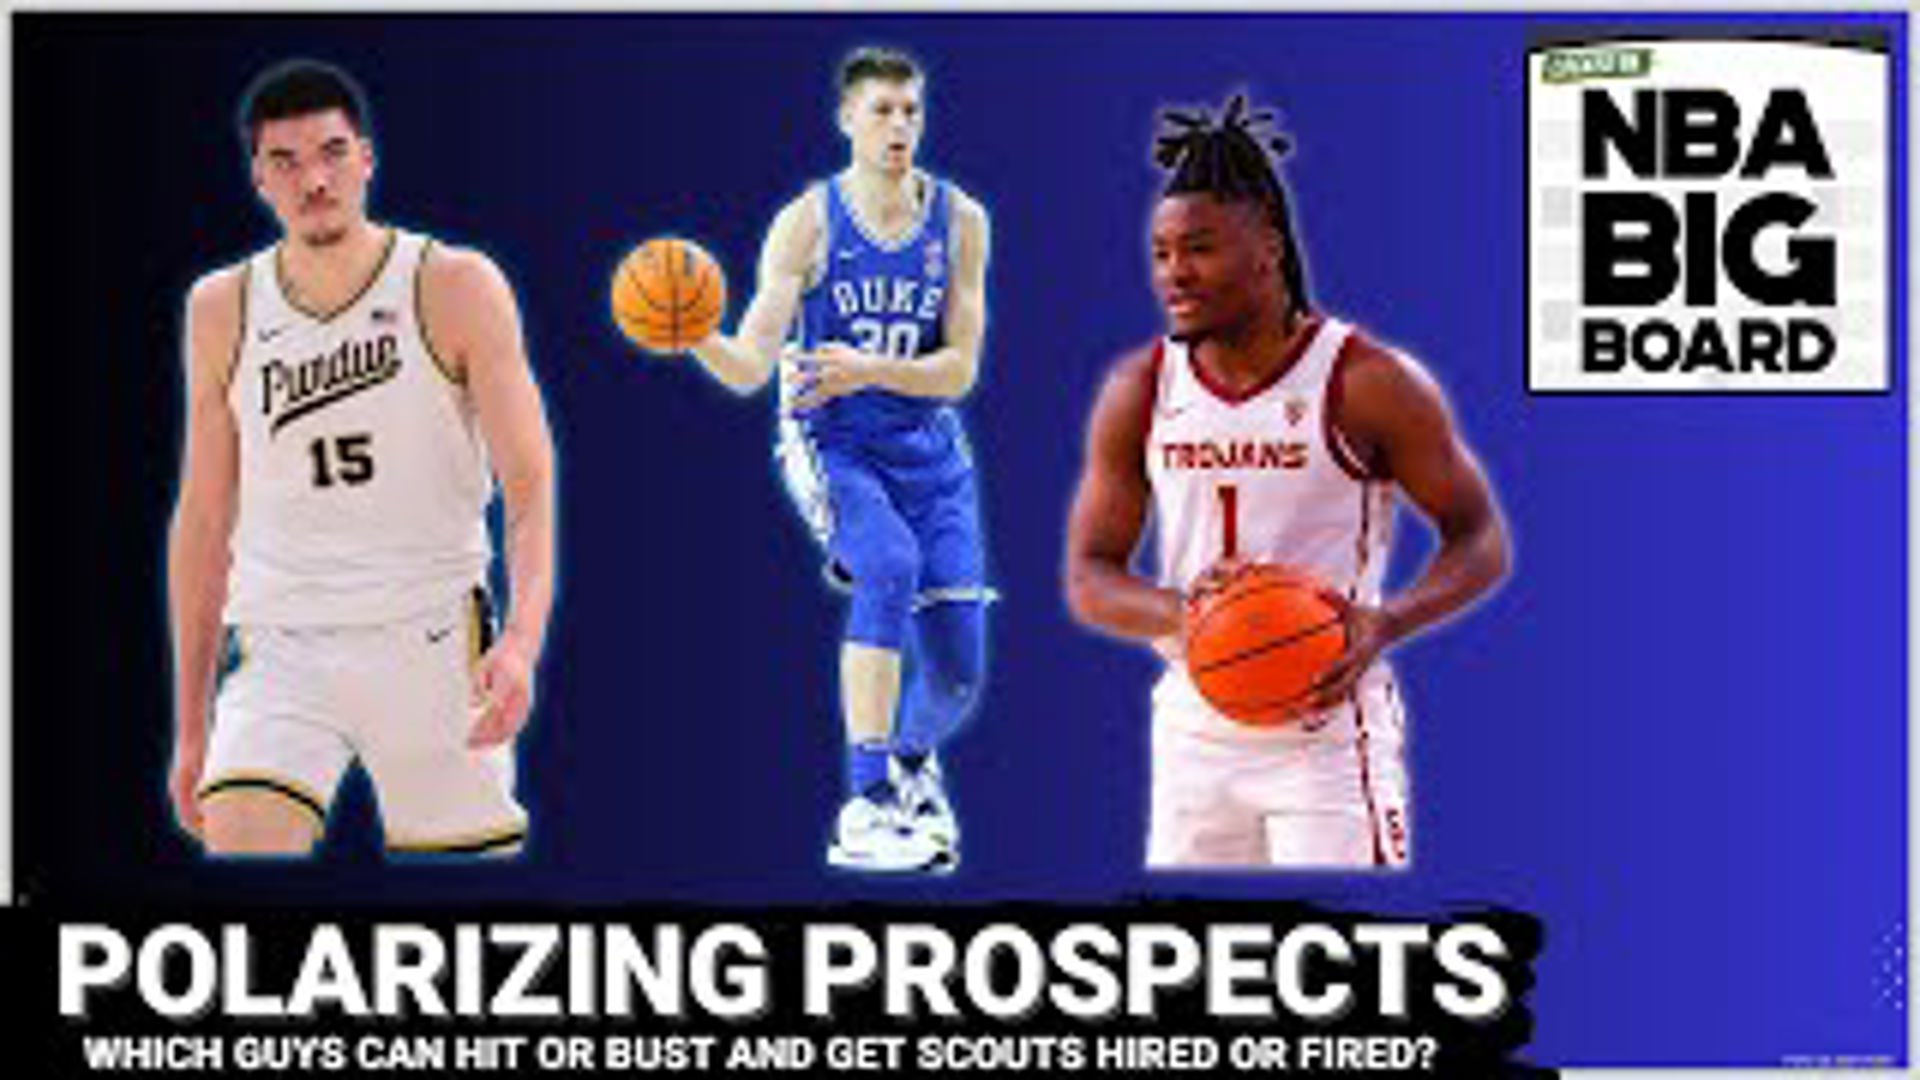 James Barlowe and Richard Stayman (MavsDraft) conduct part two of thumbs up, thumbs down, or thumbs across on polarizing players like Cody Williams!